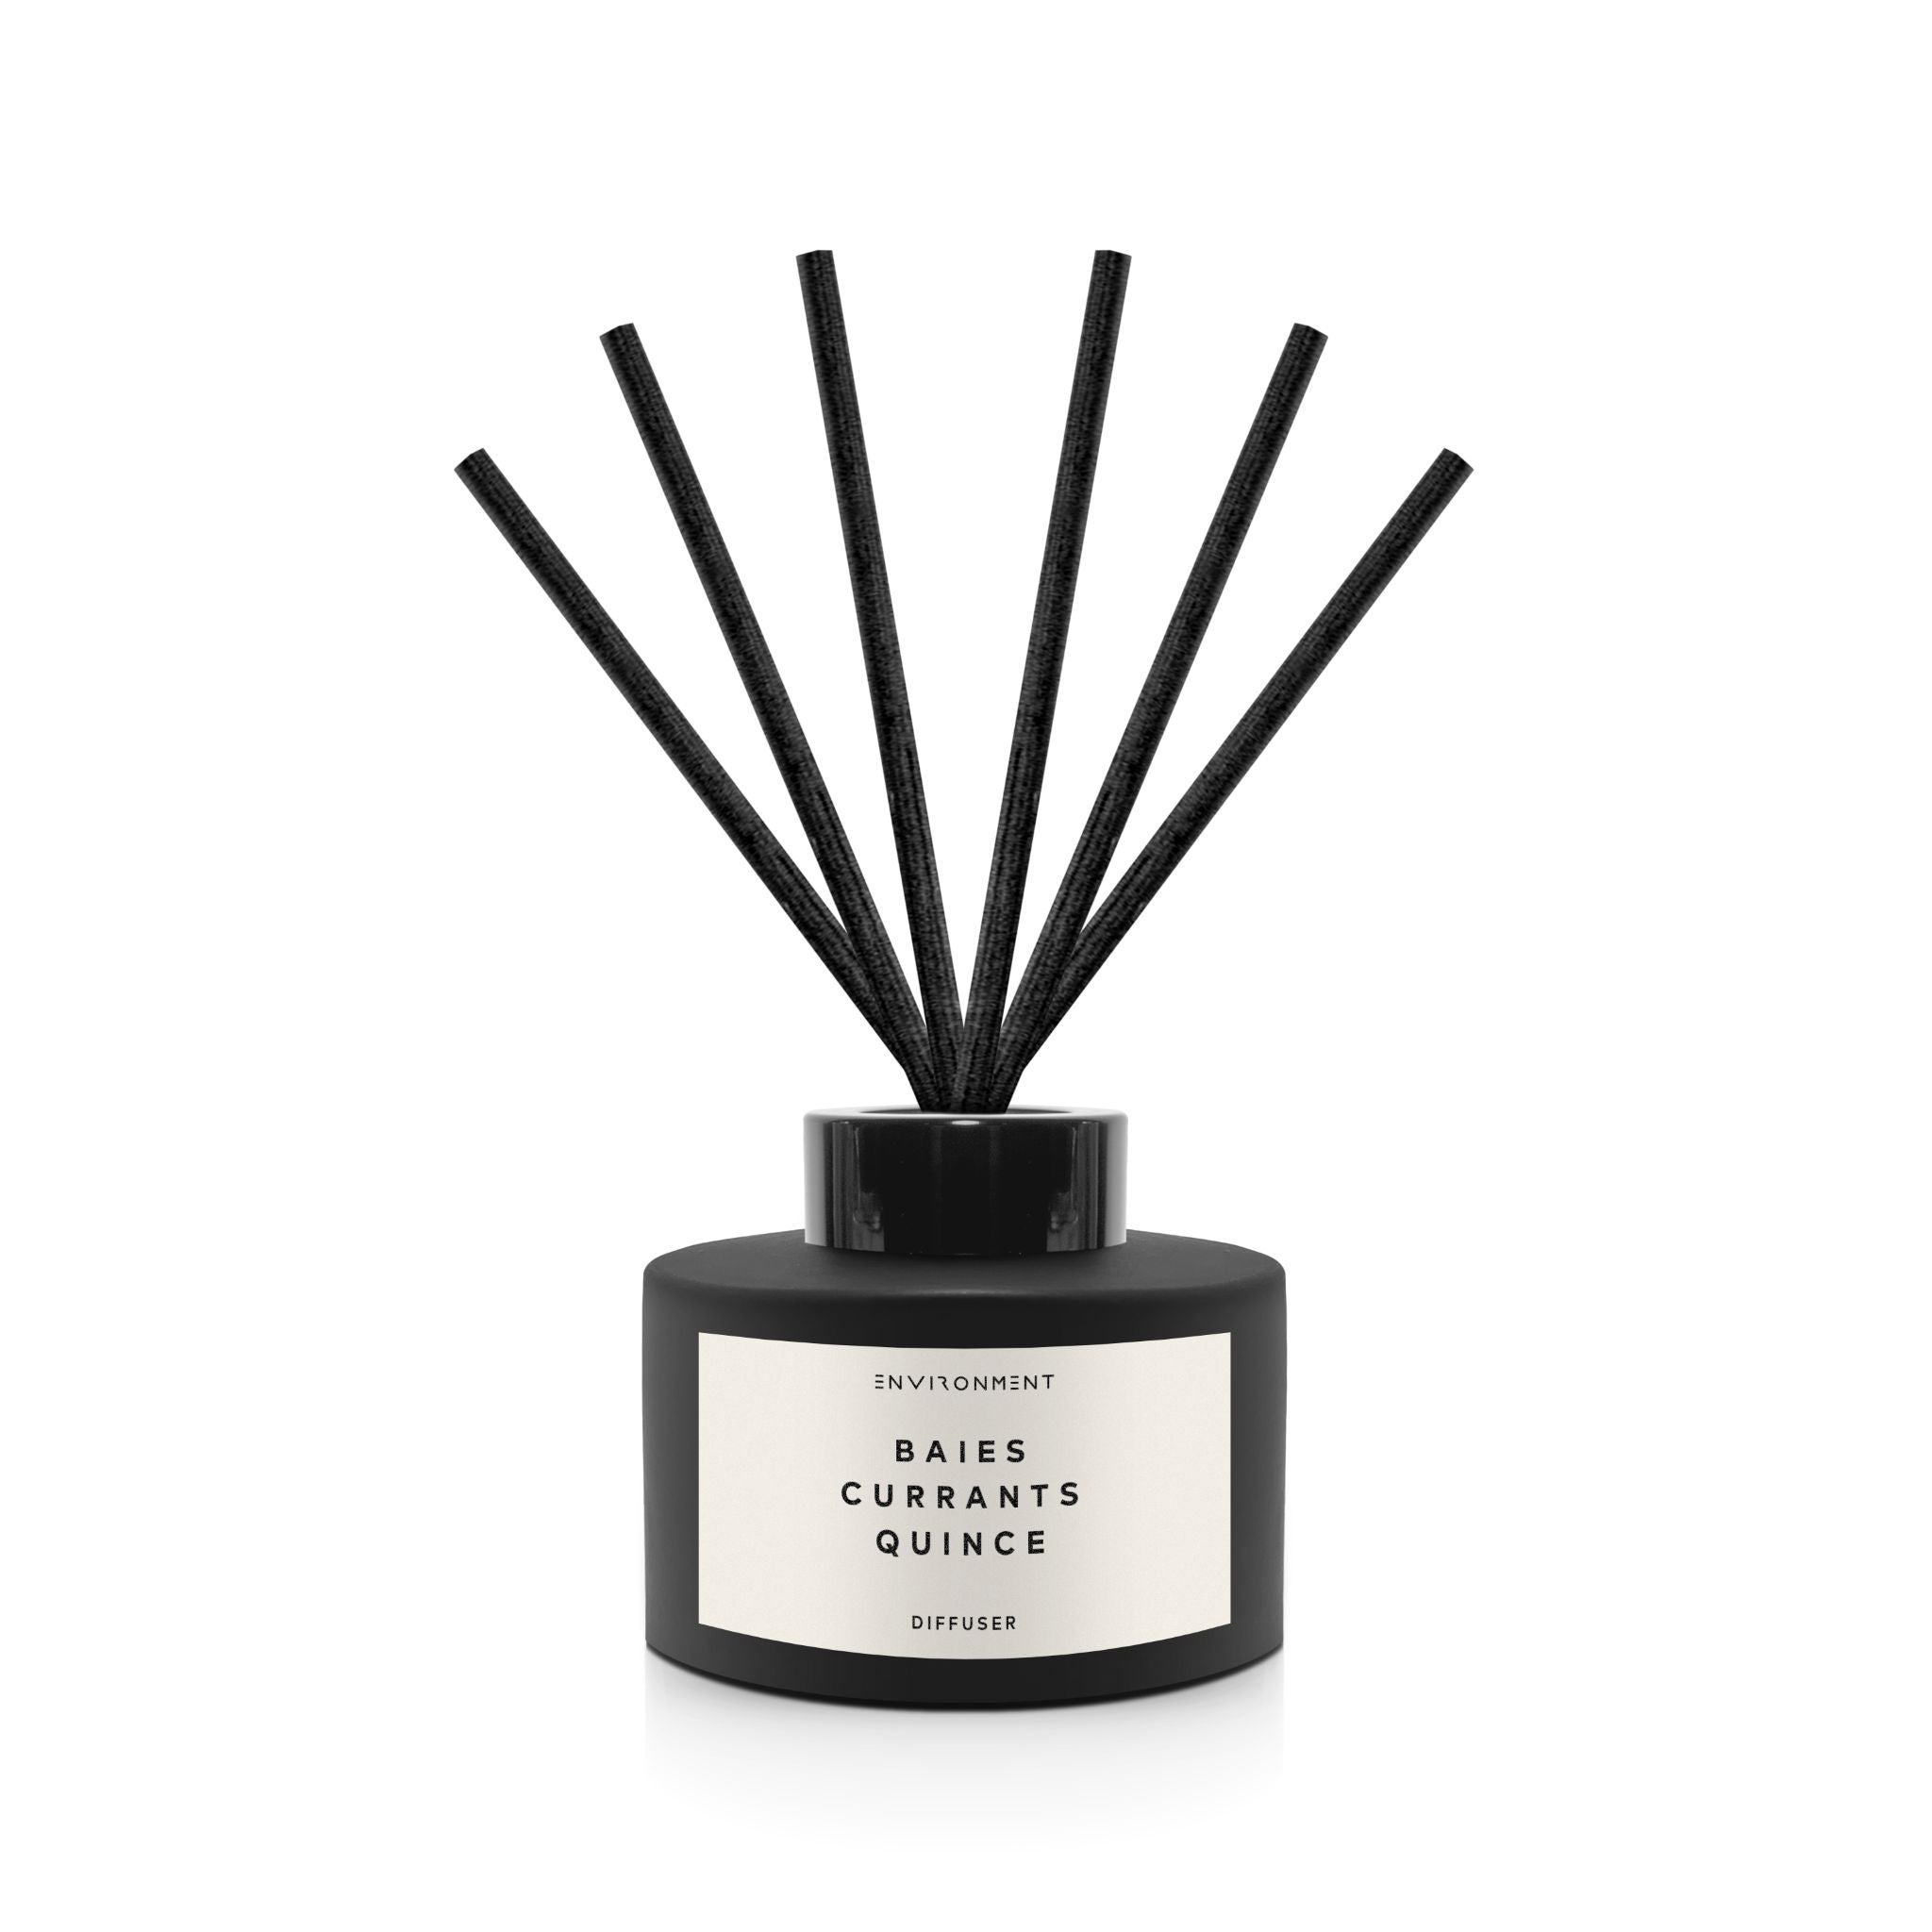 Baies | Currants | Quince Diffuser (Inspired by Diptyque Baies®)